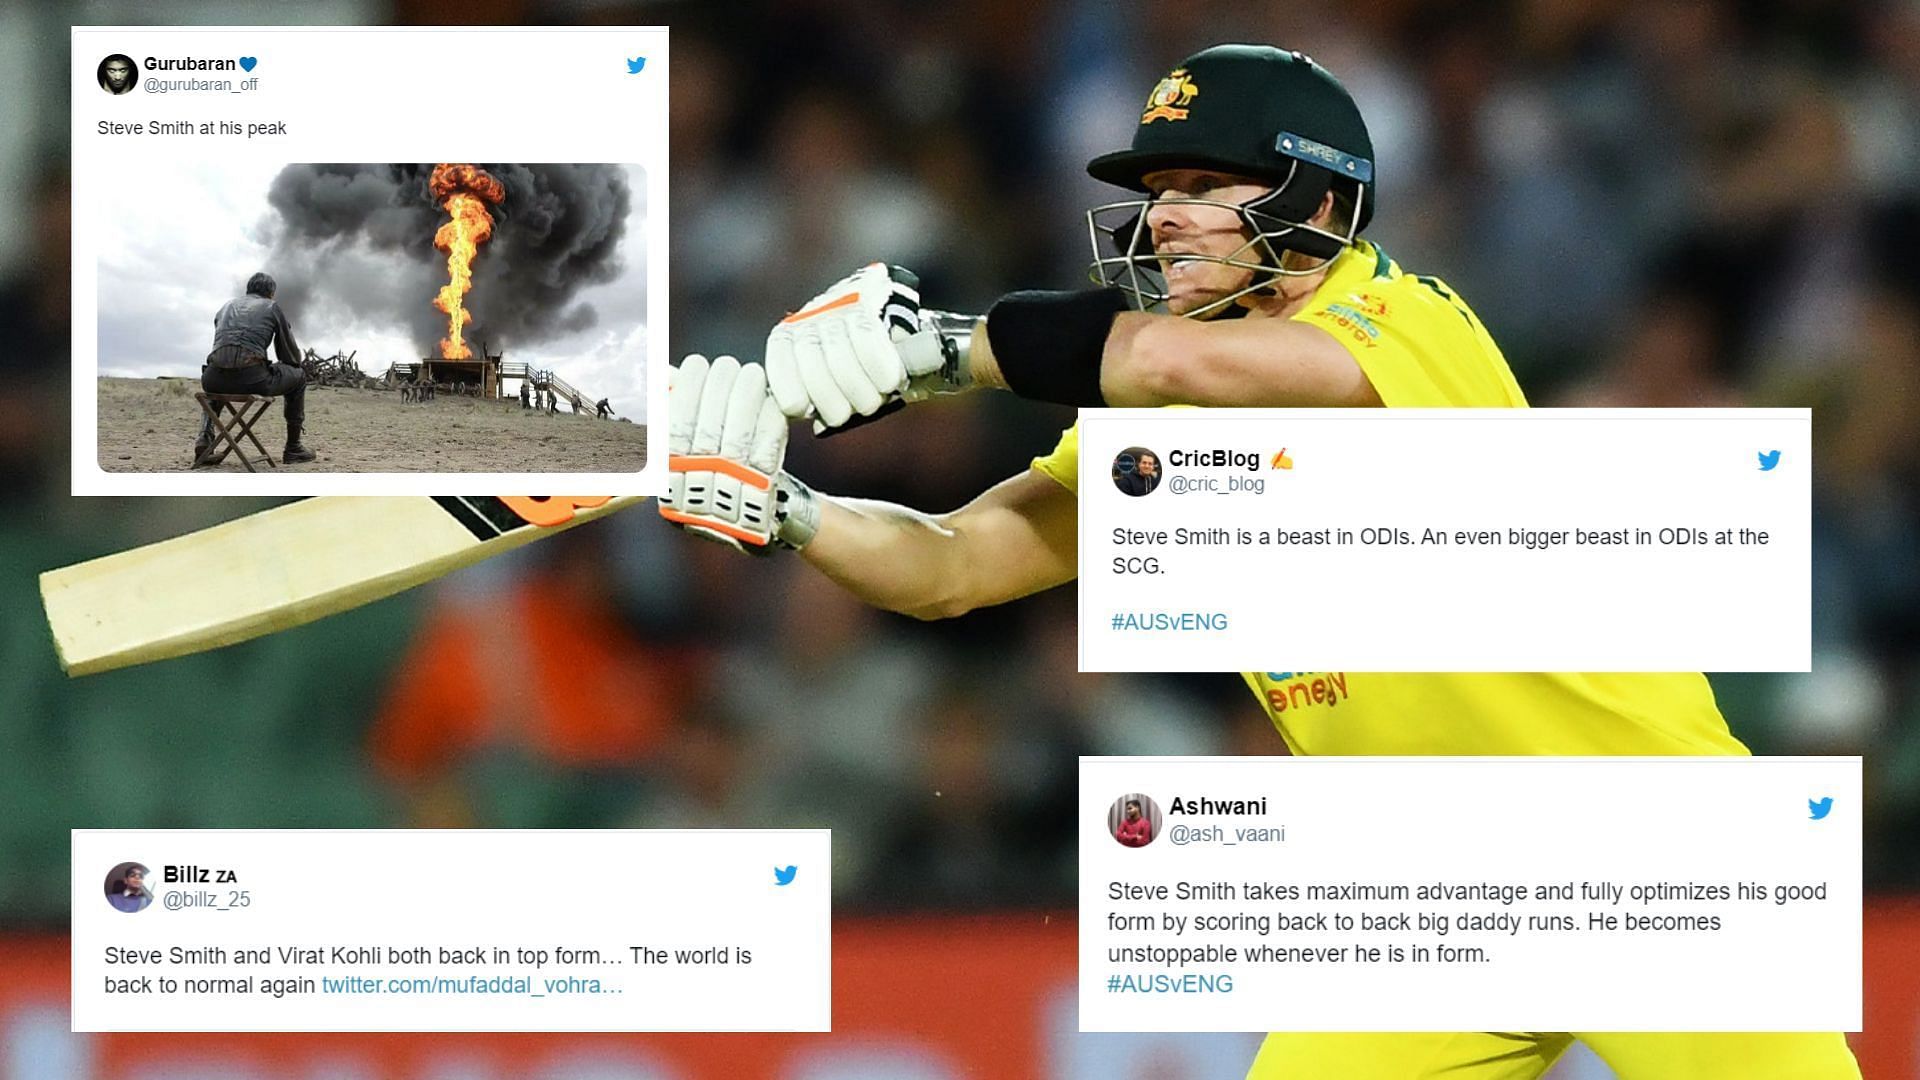 &quot;Found a IT expert and rebooted his peak version&quot; - Twitter in awe of Steve Smith